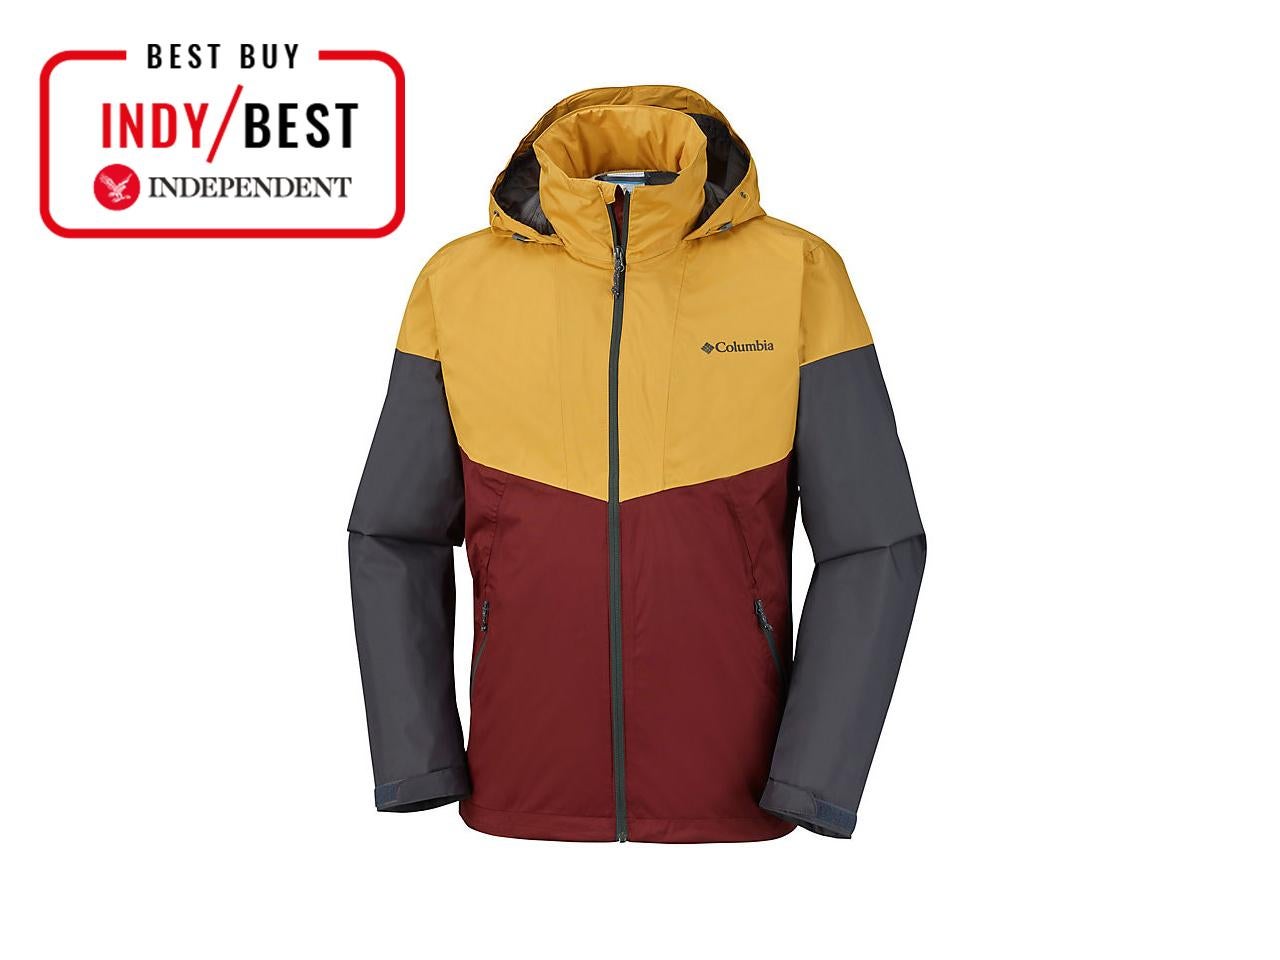 Intens dun schommel Best men's waterproof jacket for festivals that is comfortable, compact and  warm | The Independent